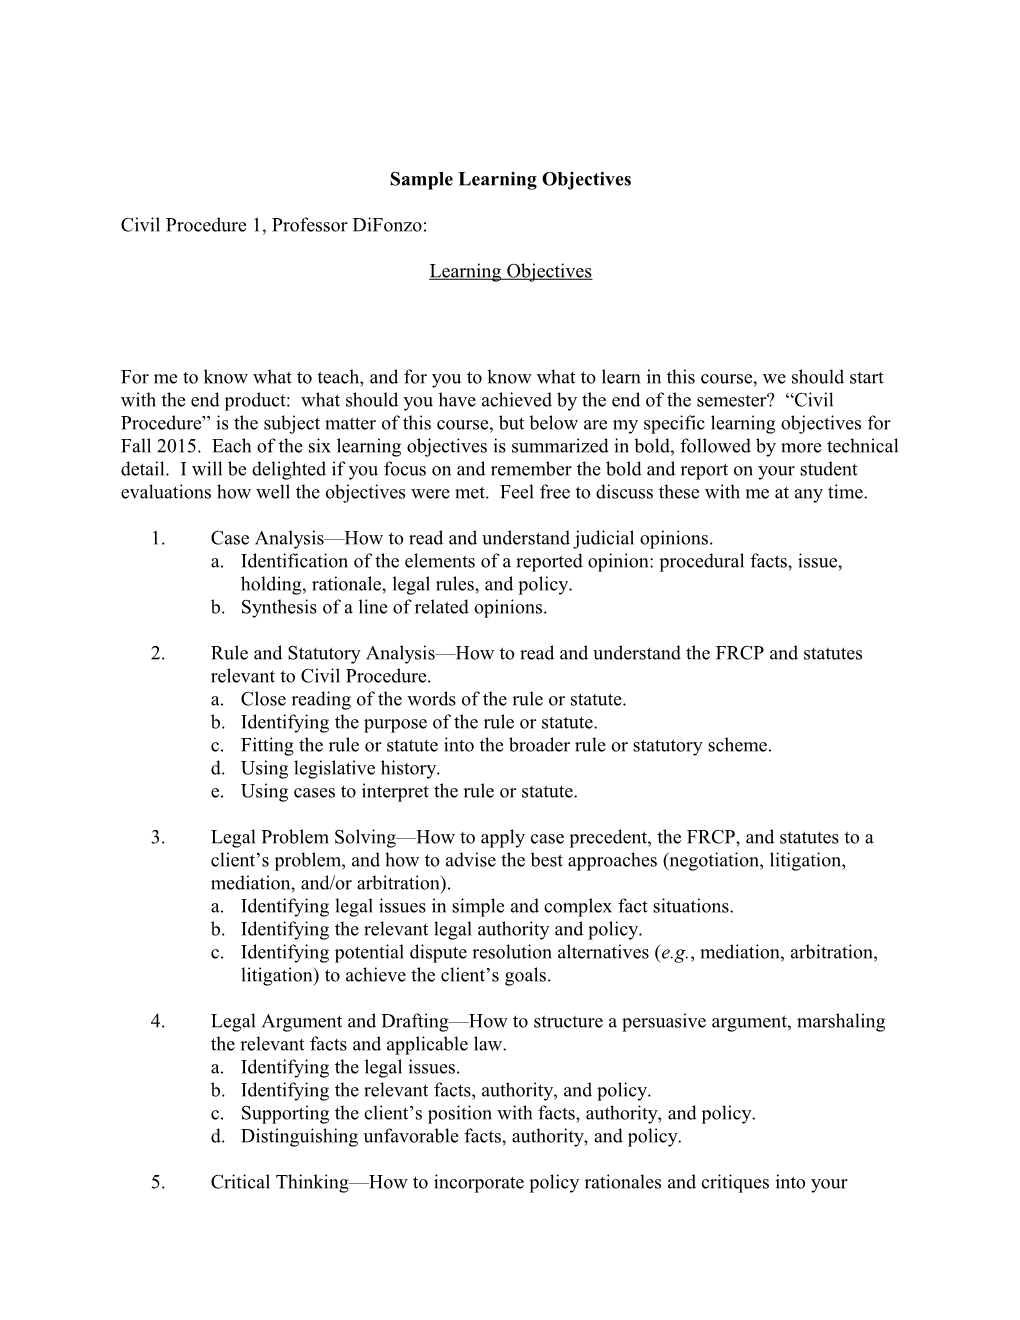 Sample Learning Objectives